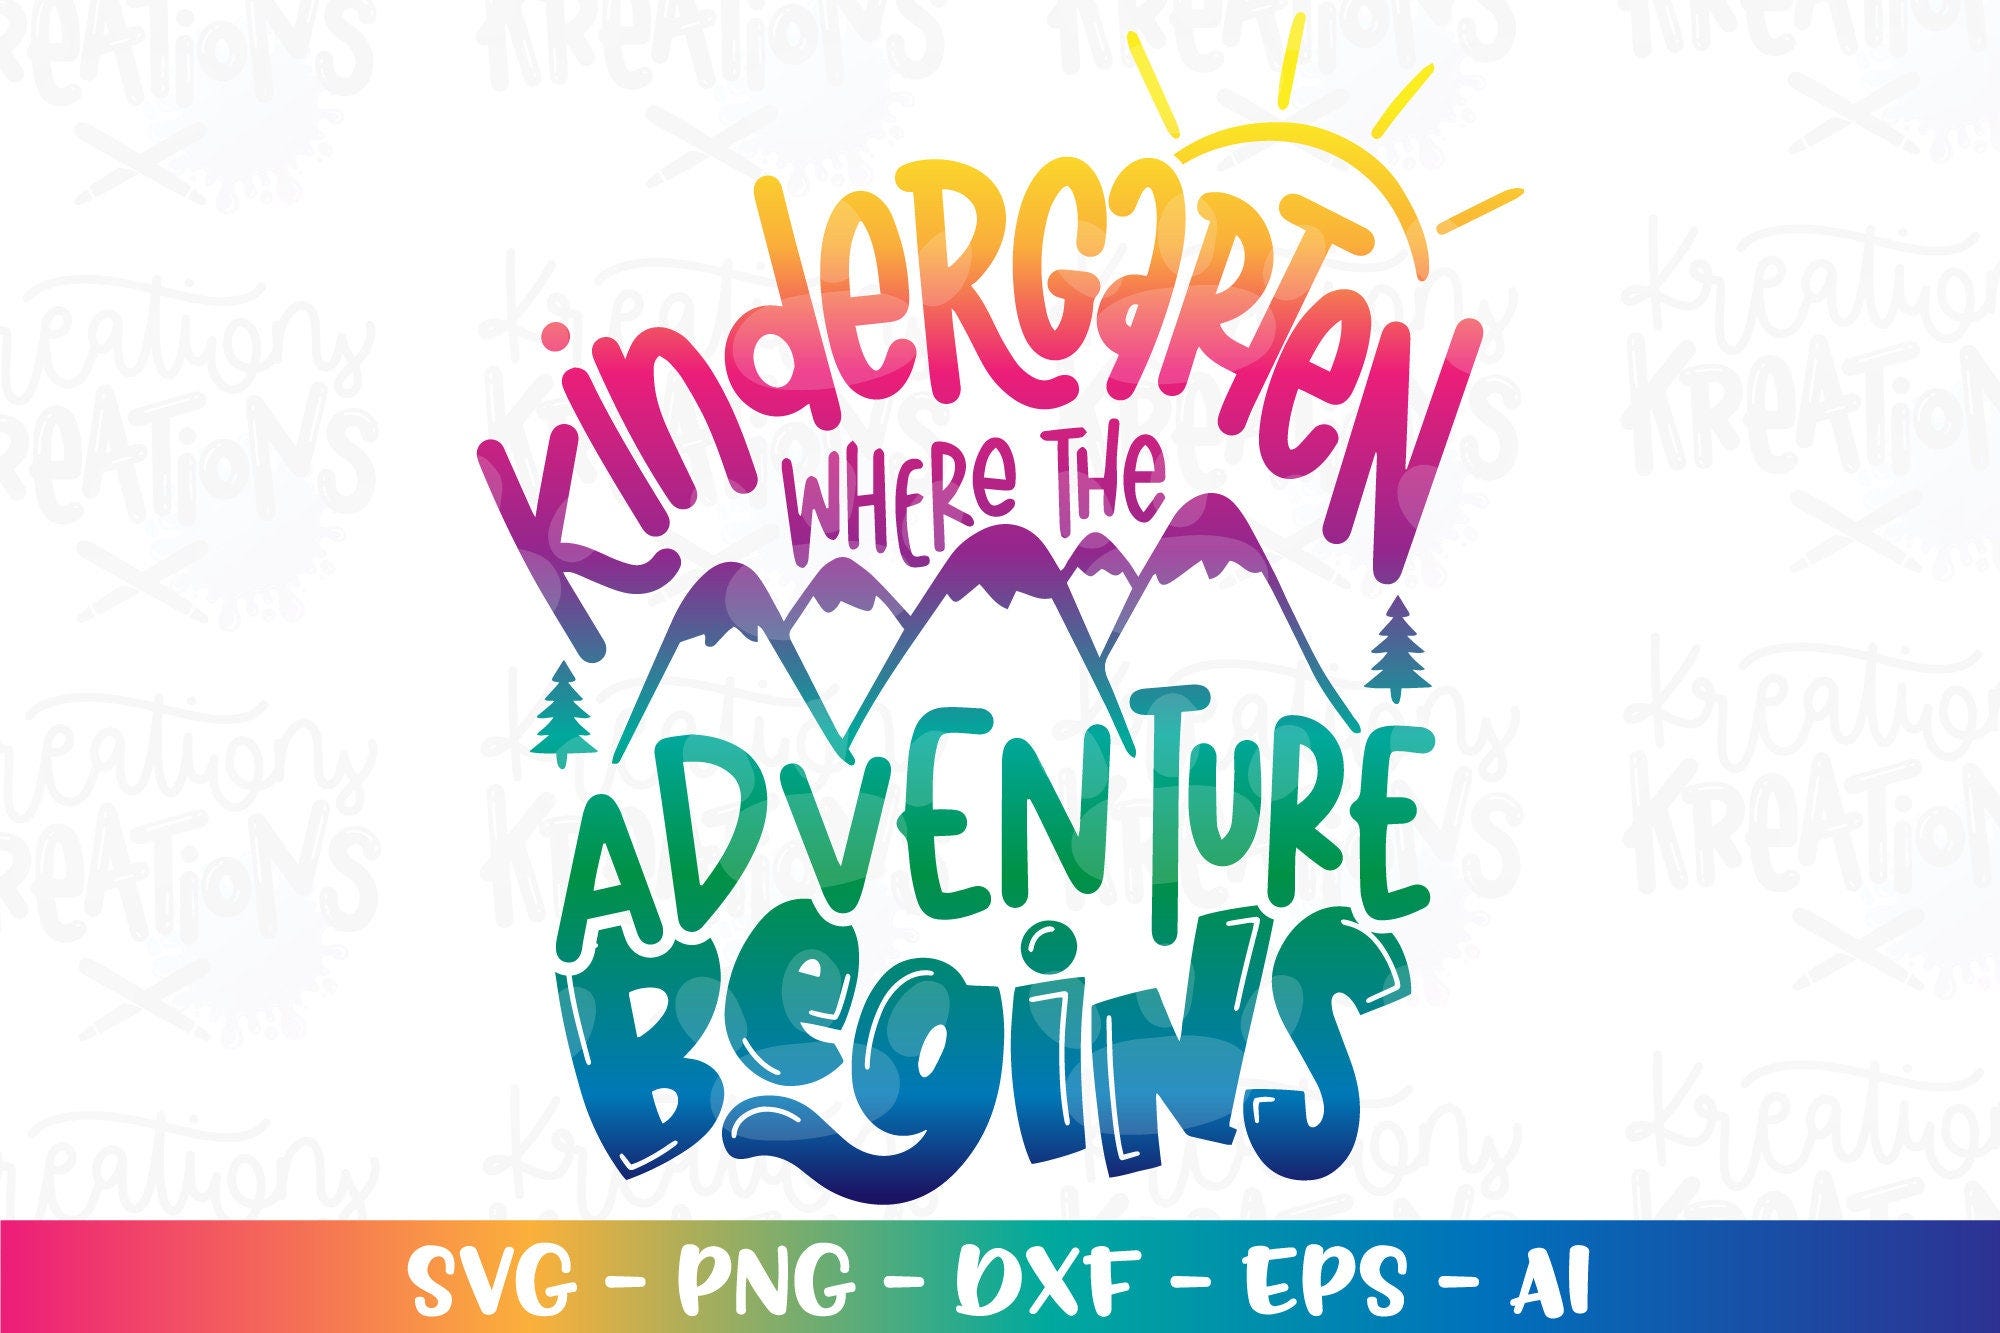 KINDERGARTEN where the adventure begins SVG Teacher back to school cute kids mountains iron on cut file download svg eps png dxf Sublimation